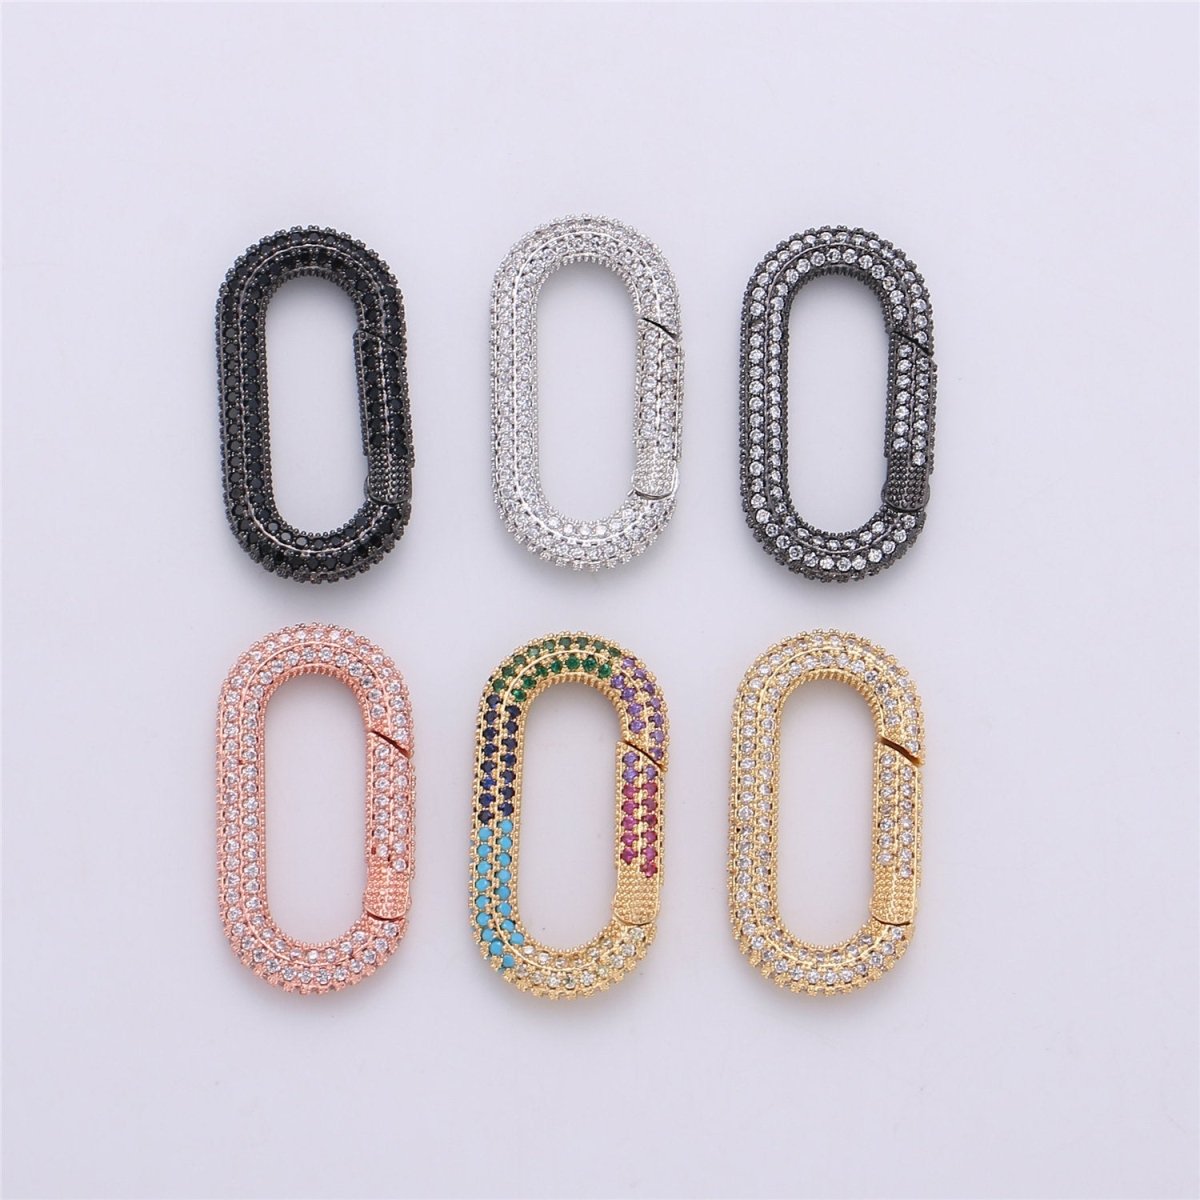 34x12mm Micro Pave Diamond Oval Clasp, Colorful Gold Silver Black Rose Gold Carabiner Snap Lock Supply for heavier chain connector Charm K-379 K-381 - DLUXCA